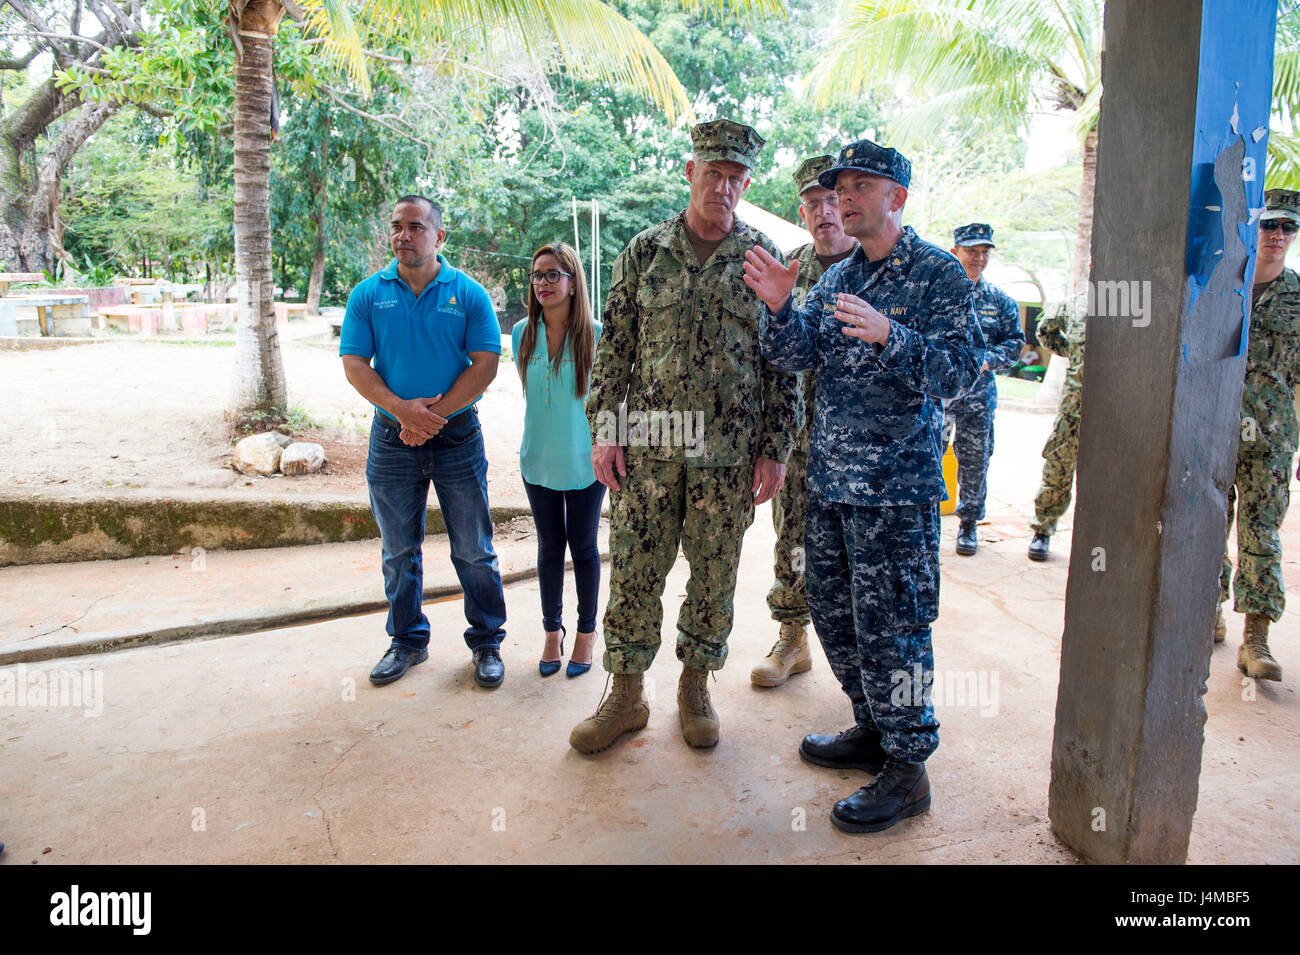 170223-N-YL073-305 TRUJILLO, Honduras (Feb. 23, 2017) – Rear Adm. Sean S. Buck (middle), Commander U.S. Naval Forces Southern Command/U.S. 4th Fleet (USNAVSO/FOURTHFLT), receives a tour of the Continuing Promise 2017 (CP-17) medical site from Lt. Cmdr. Robert Lennon, CP-17's Medical Officer in Charge, in support of the mission's visit to Trujillo, Honduras. CP-17 is a U.S. Southern Command-sponsored and U.S. Naval Forces Southern Command/U.S. 4th Fleet-conducted deployment to conduct civil-military operations including humanitarian assistance, training engagements, and medical, dental, and vet Stock Photo